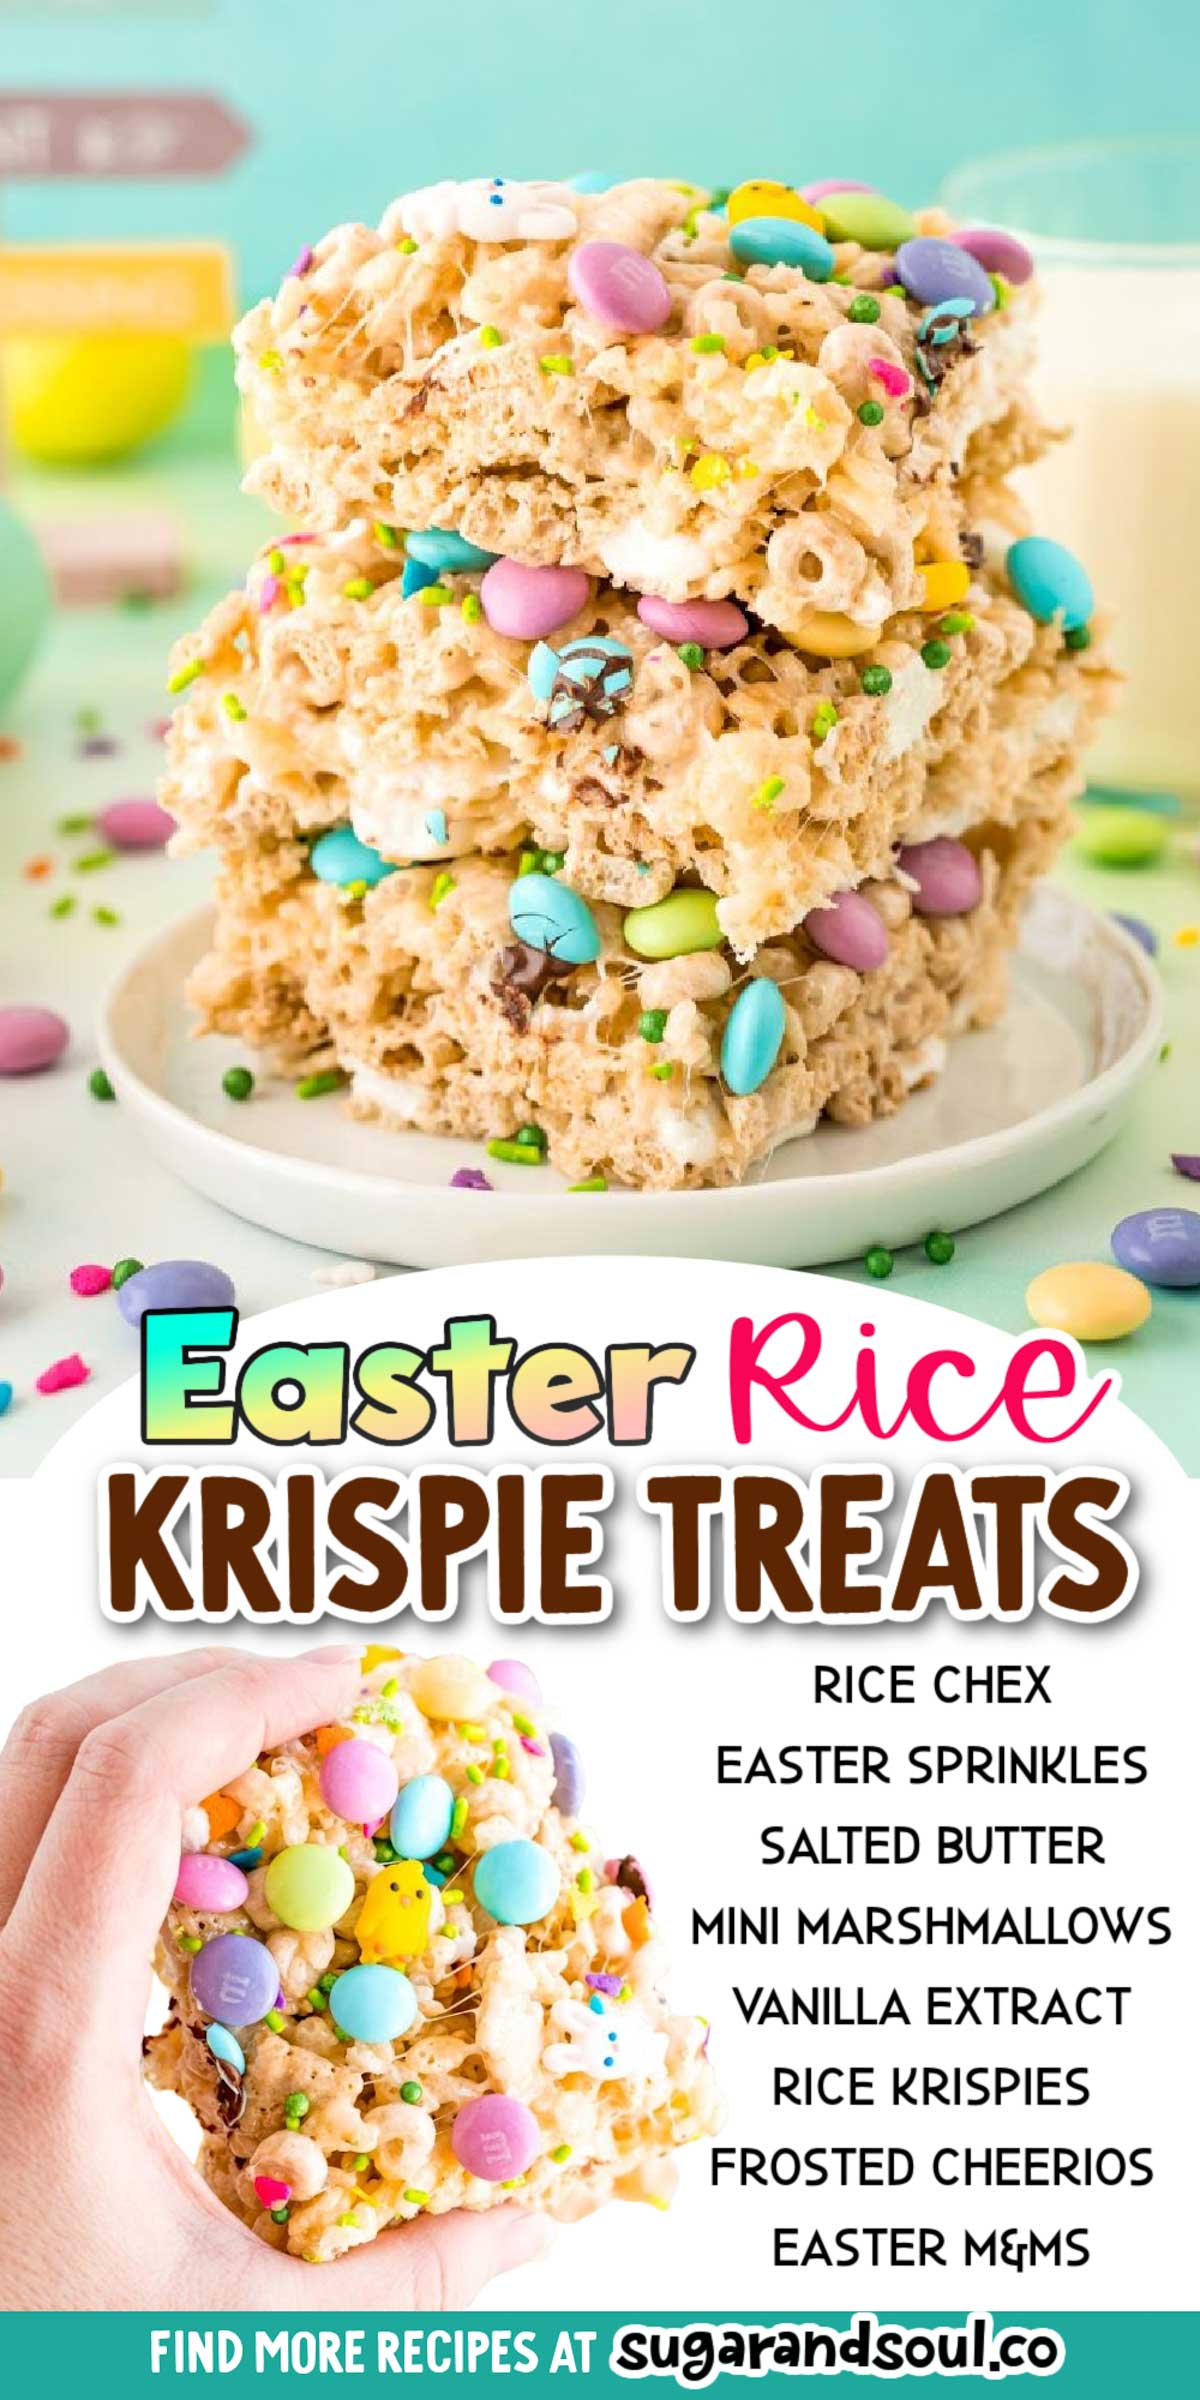 Easter Rice Krispie Treats are sweet, chewy no-bake squares that are made with three kinds of cereal, marshmallows, sprinkles, and M&Ms! Takes only 10 minutes of hands-on time to prepare! via @sugarandsoulco